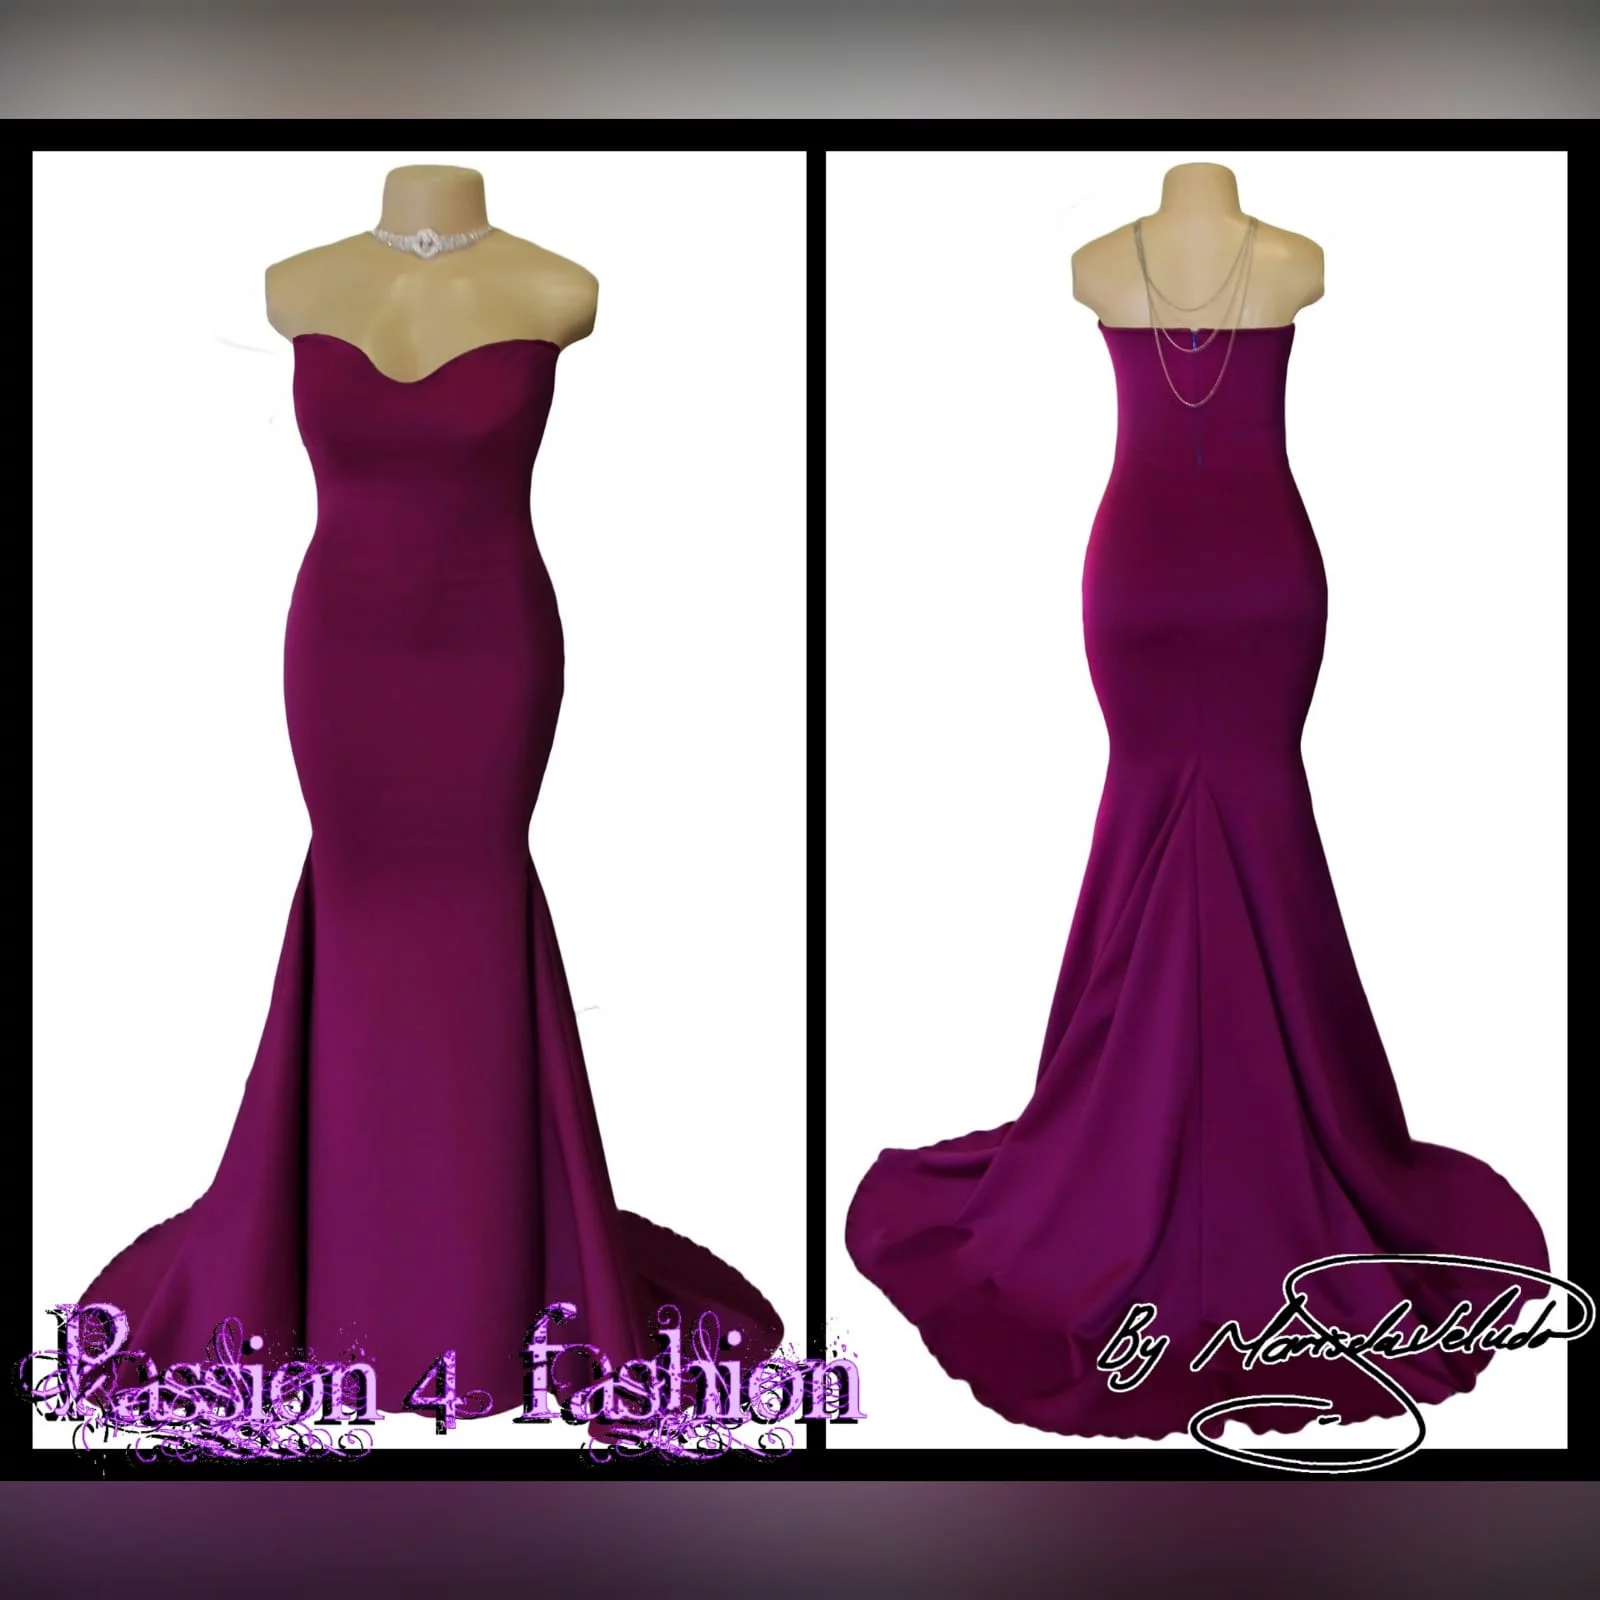 Fuschia soft mermaid tube evening dress 3 fuschia soft mermaid tube evening dress.   with a sweetheart neckline, straight back and a train. Excludes accessory.